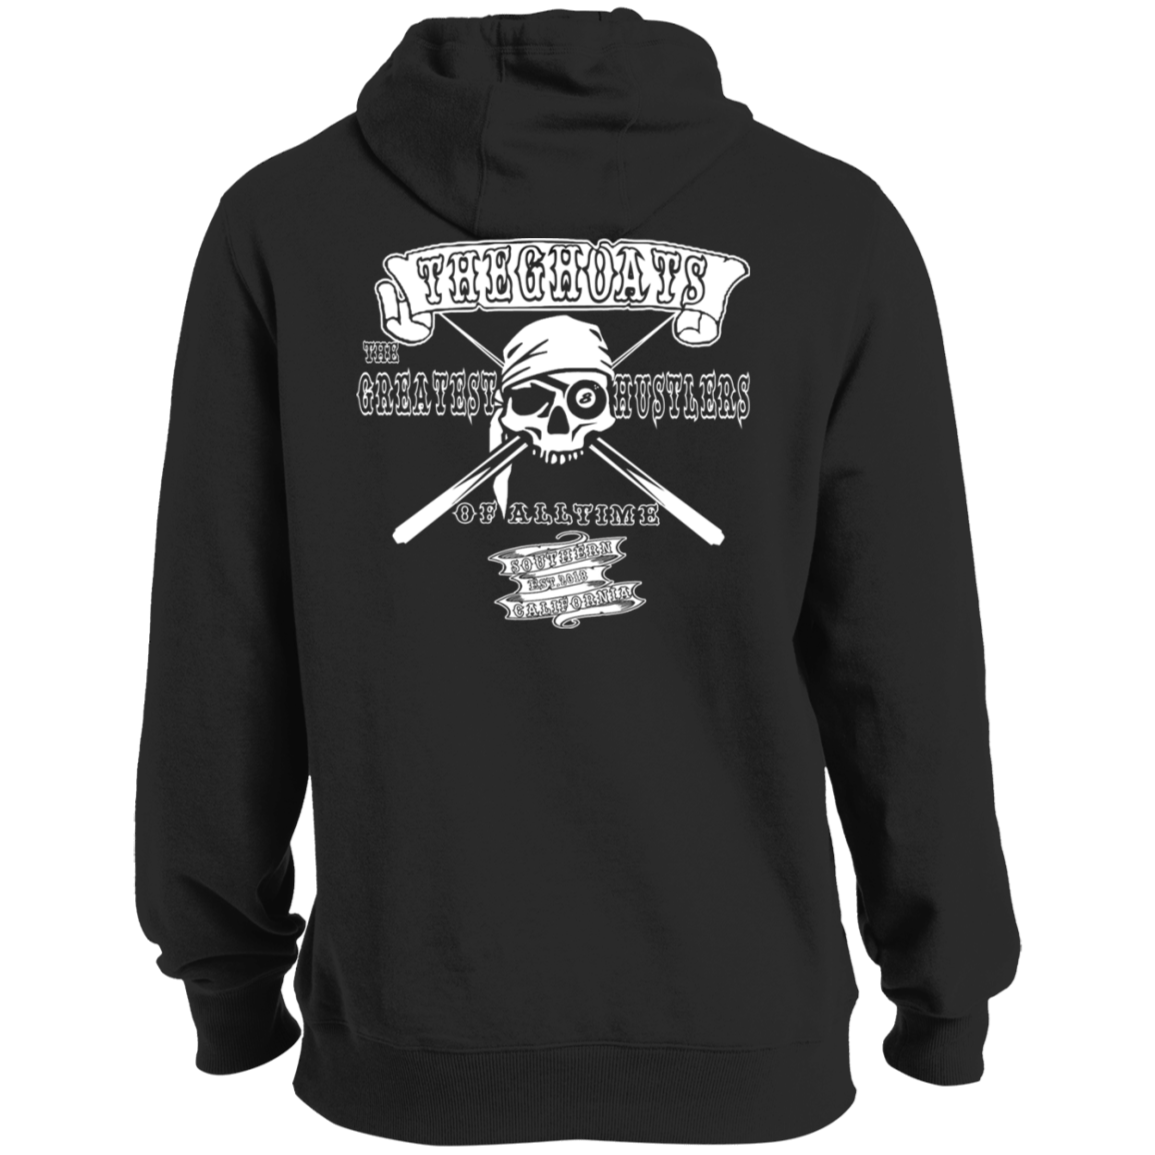 The GHOATS Custom Design. #4 Motorcycle Club Style. Ver 2/2. Ultra Soft Pullover Hoodie